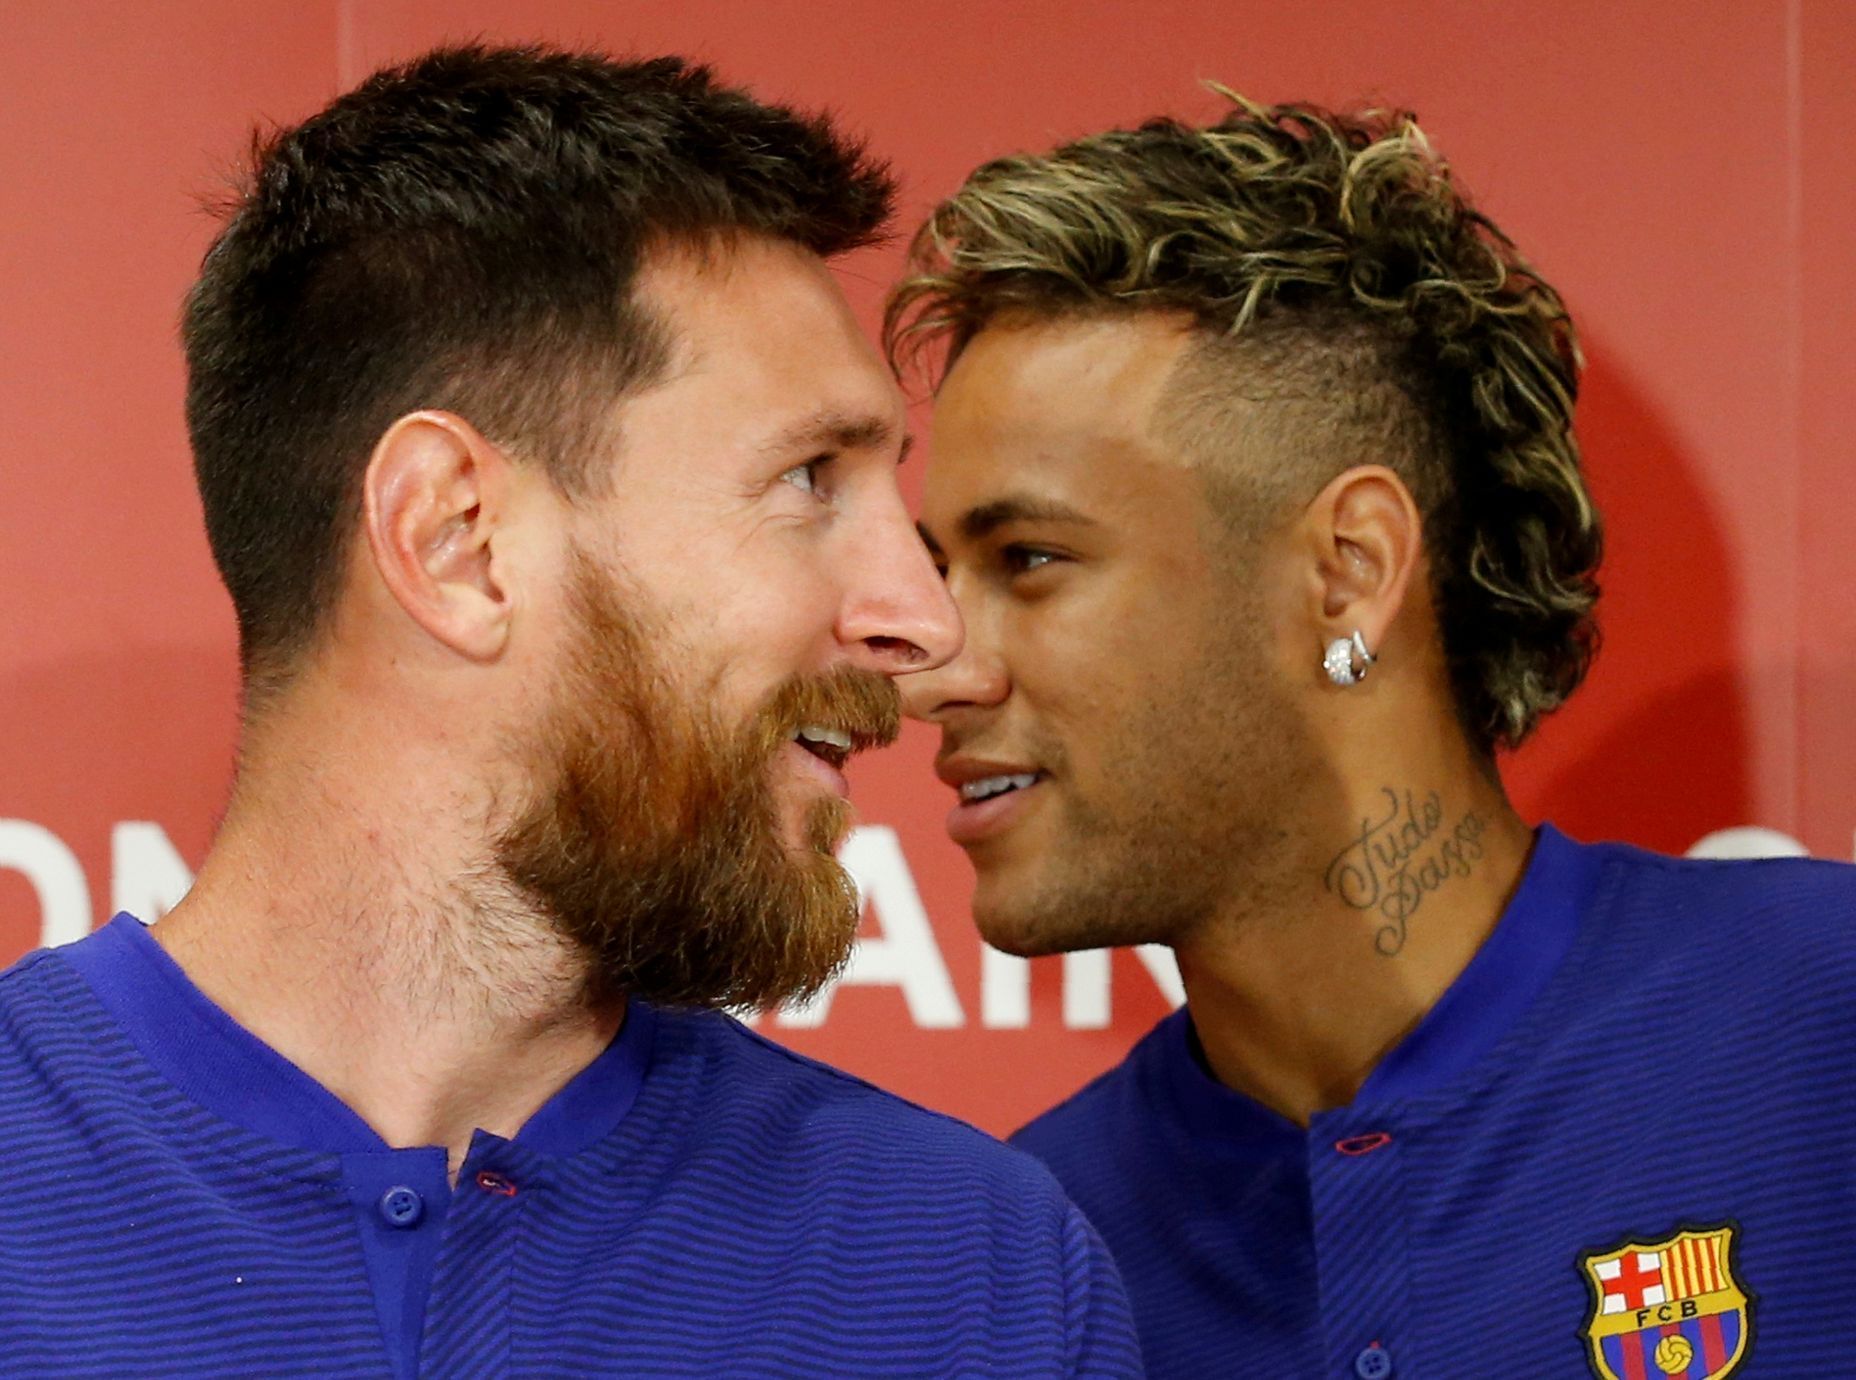 FILE PHOTO: FC Barcelona players Lionel Messi and Neymar attend a news conference to announce the sponsorship deal between the team and Rakuten Inc. in Tokyo